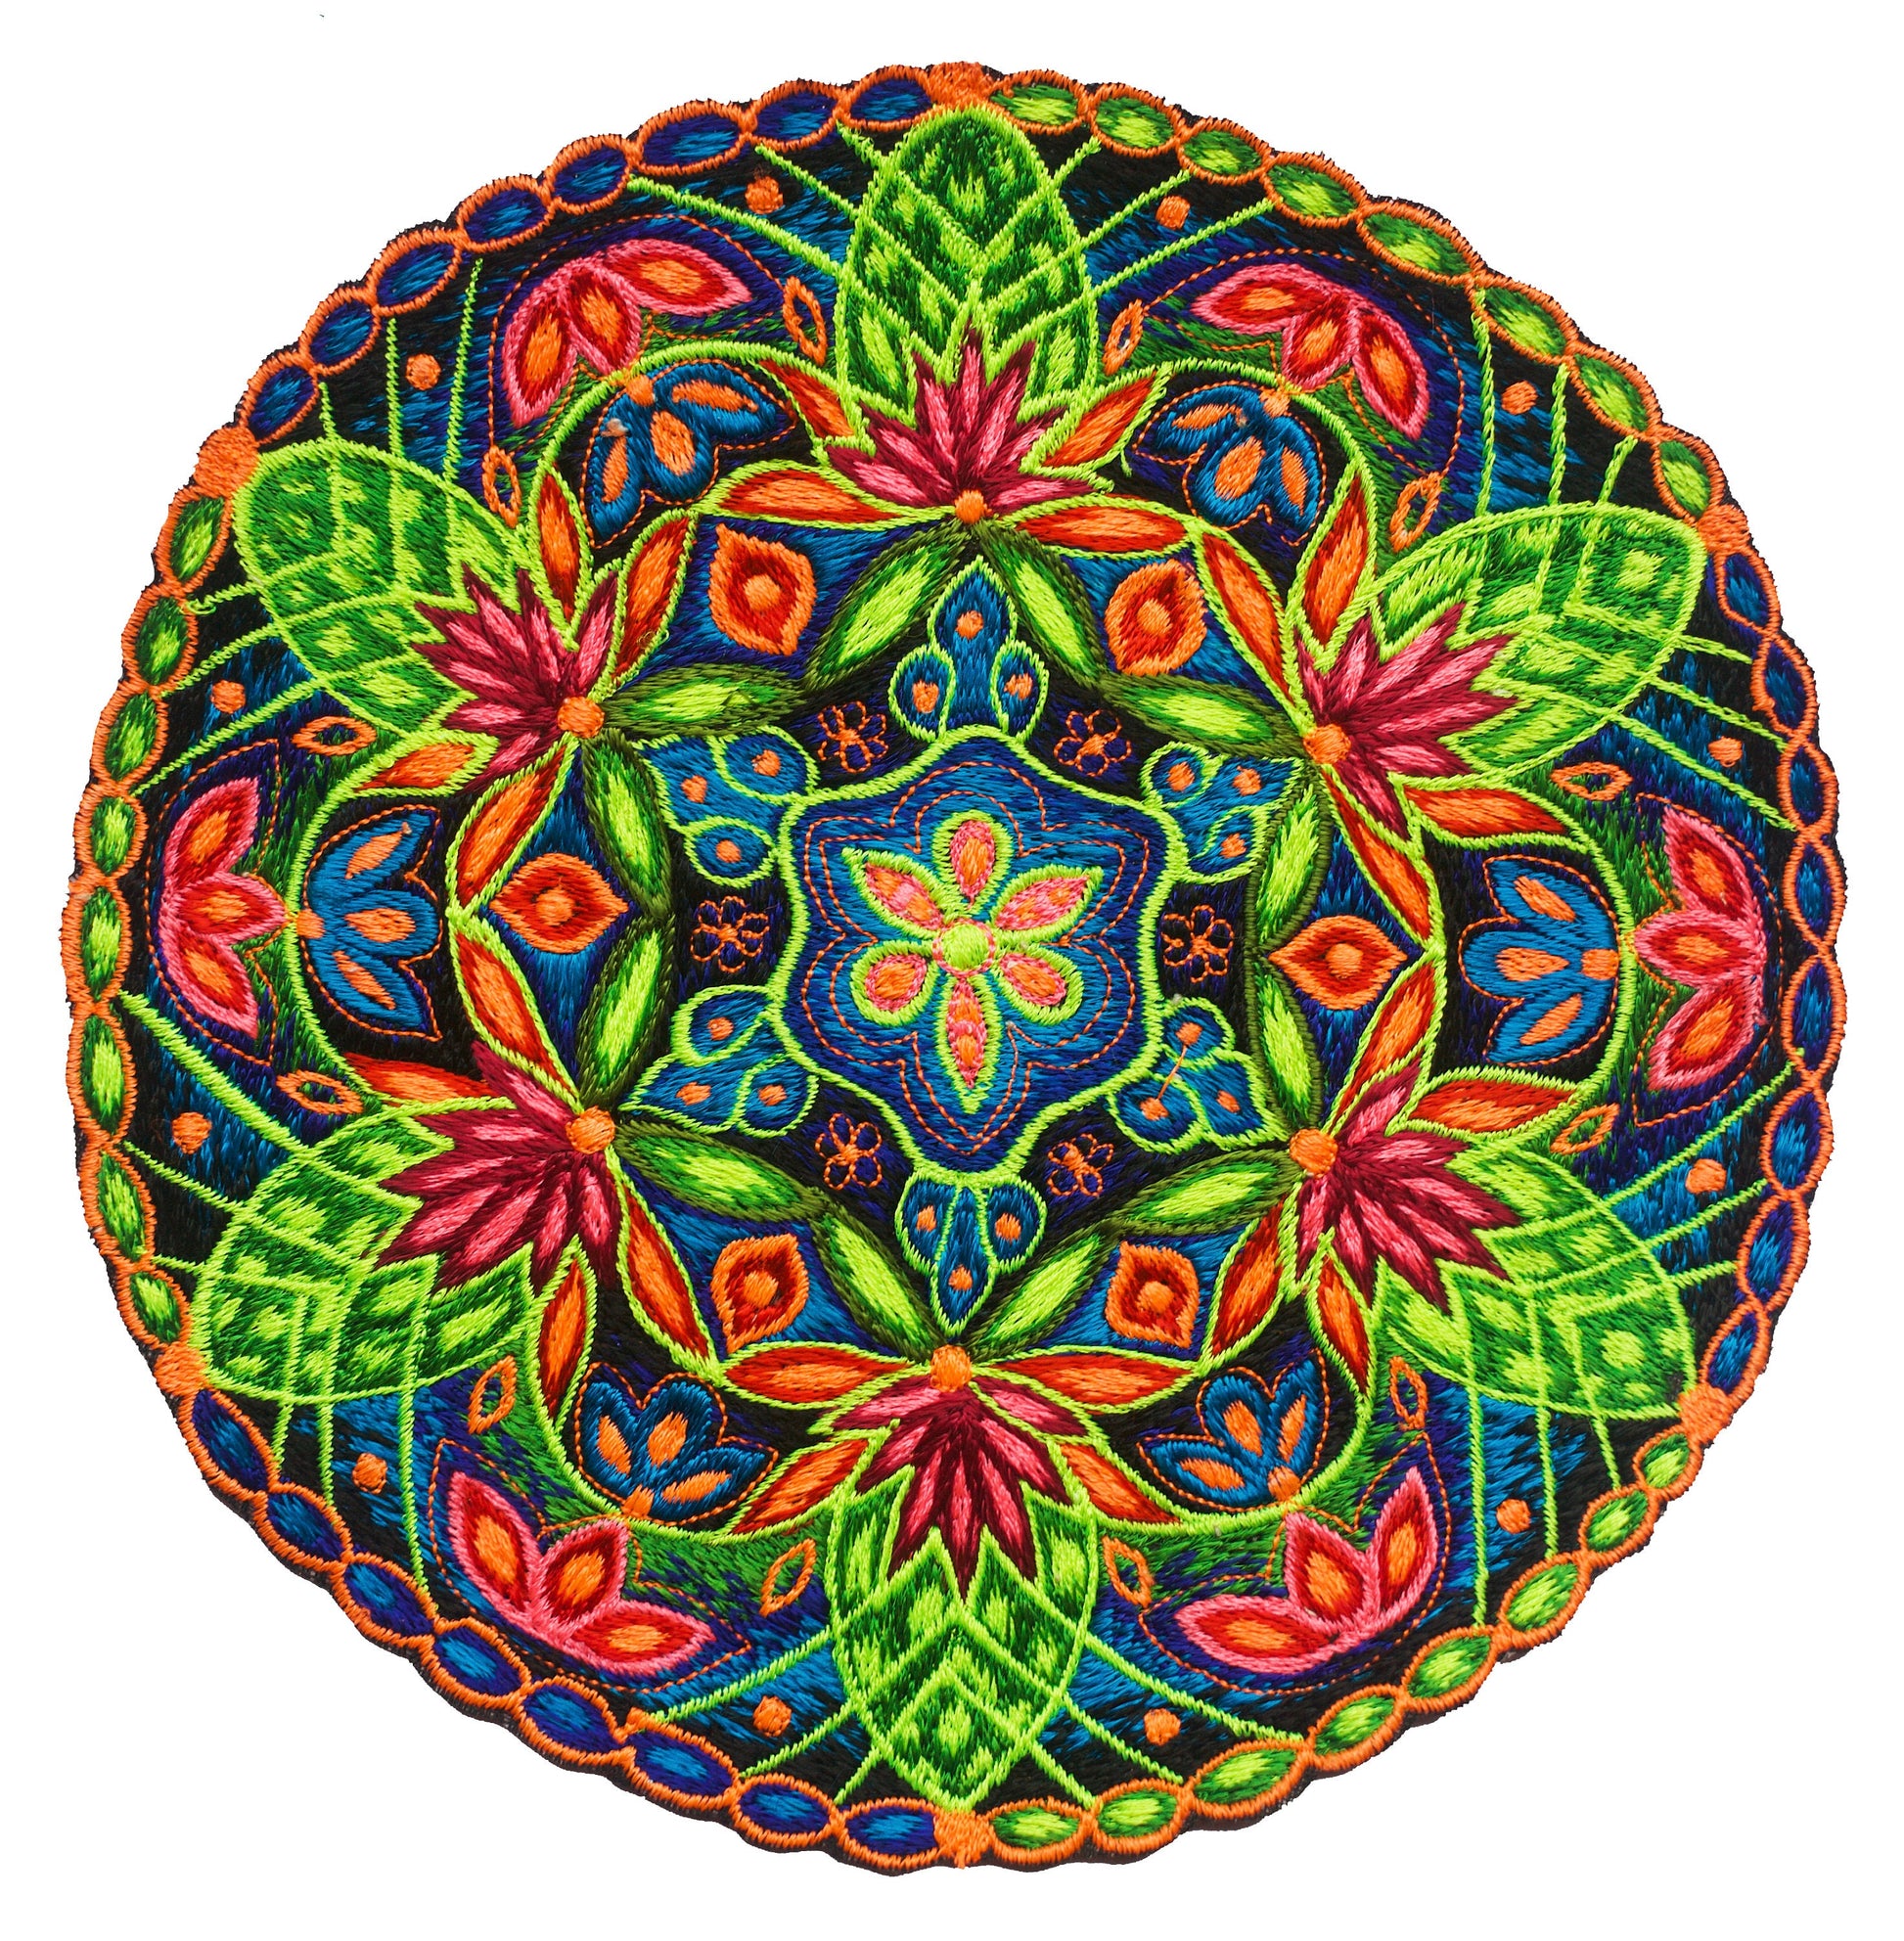 Hyperspace Lotus Mandala art blacklight glowing patch magnificent high detail psychedelic embroidery